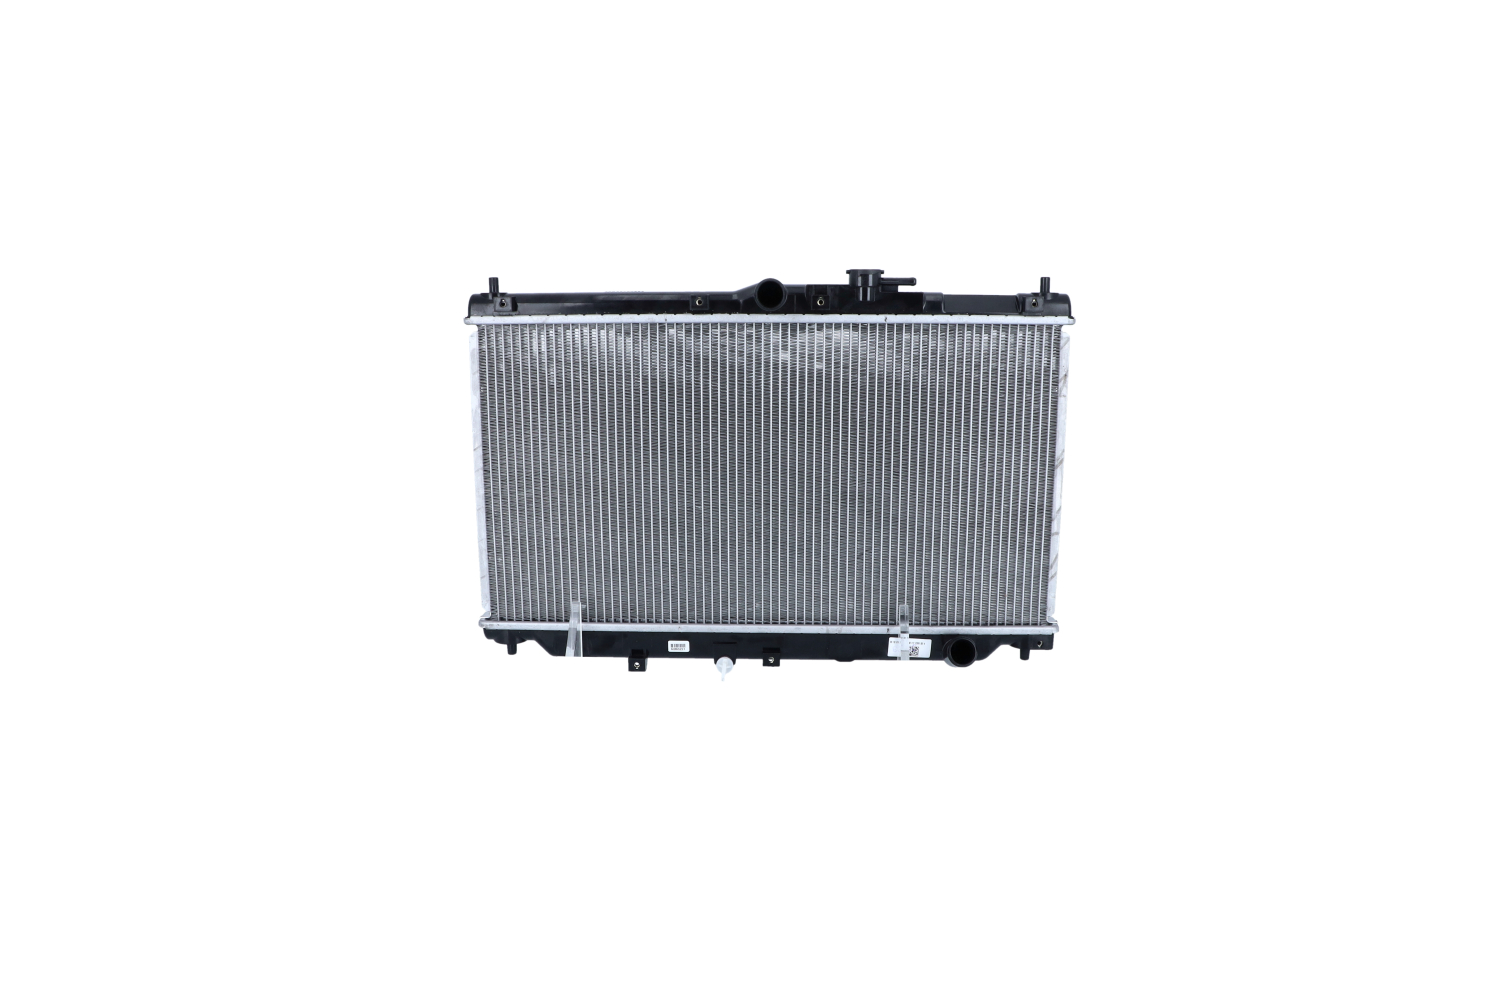 NRF 507722 Engine radiator Aluminium, 665 x 350 x 24 mm, with mounting parts, Brazed cooling fins